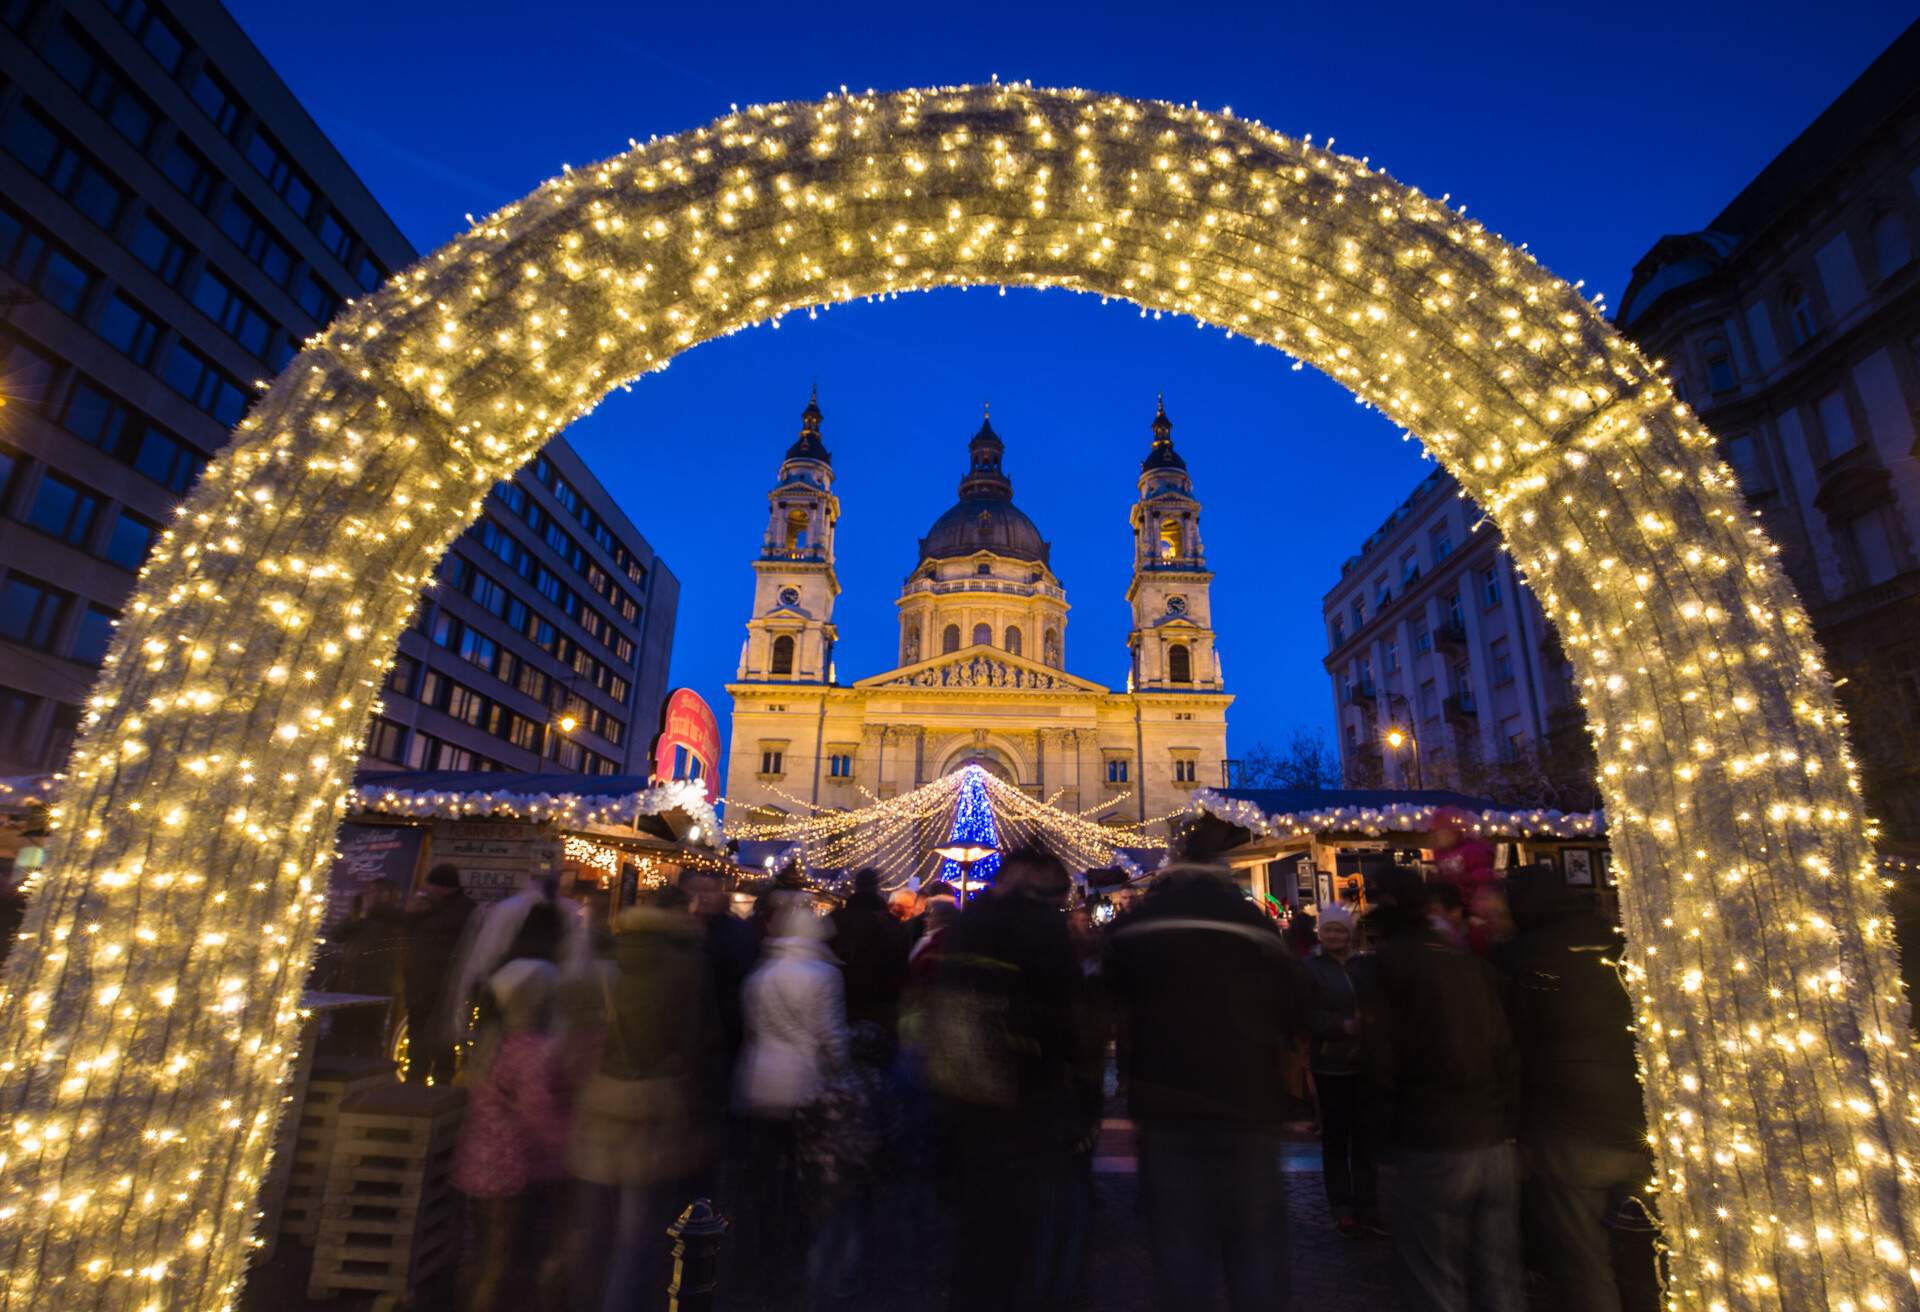 15 Christmas holiday destinations to feel truly festive